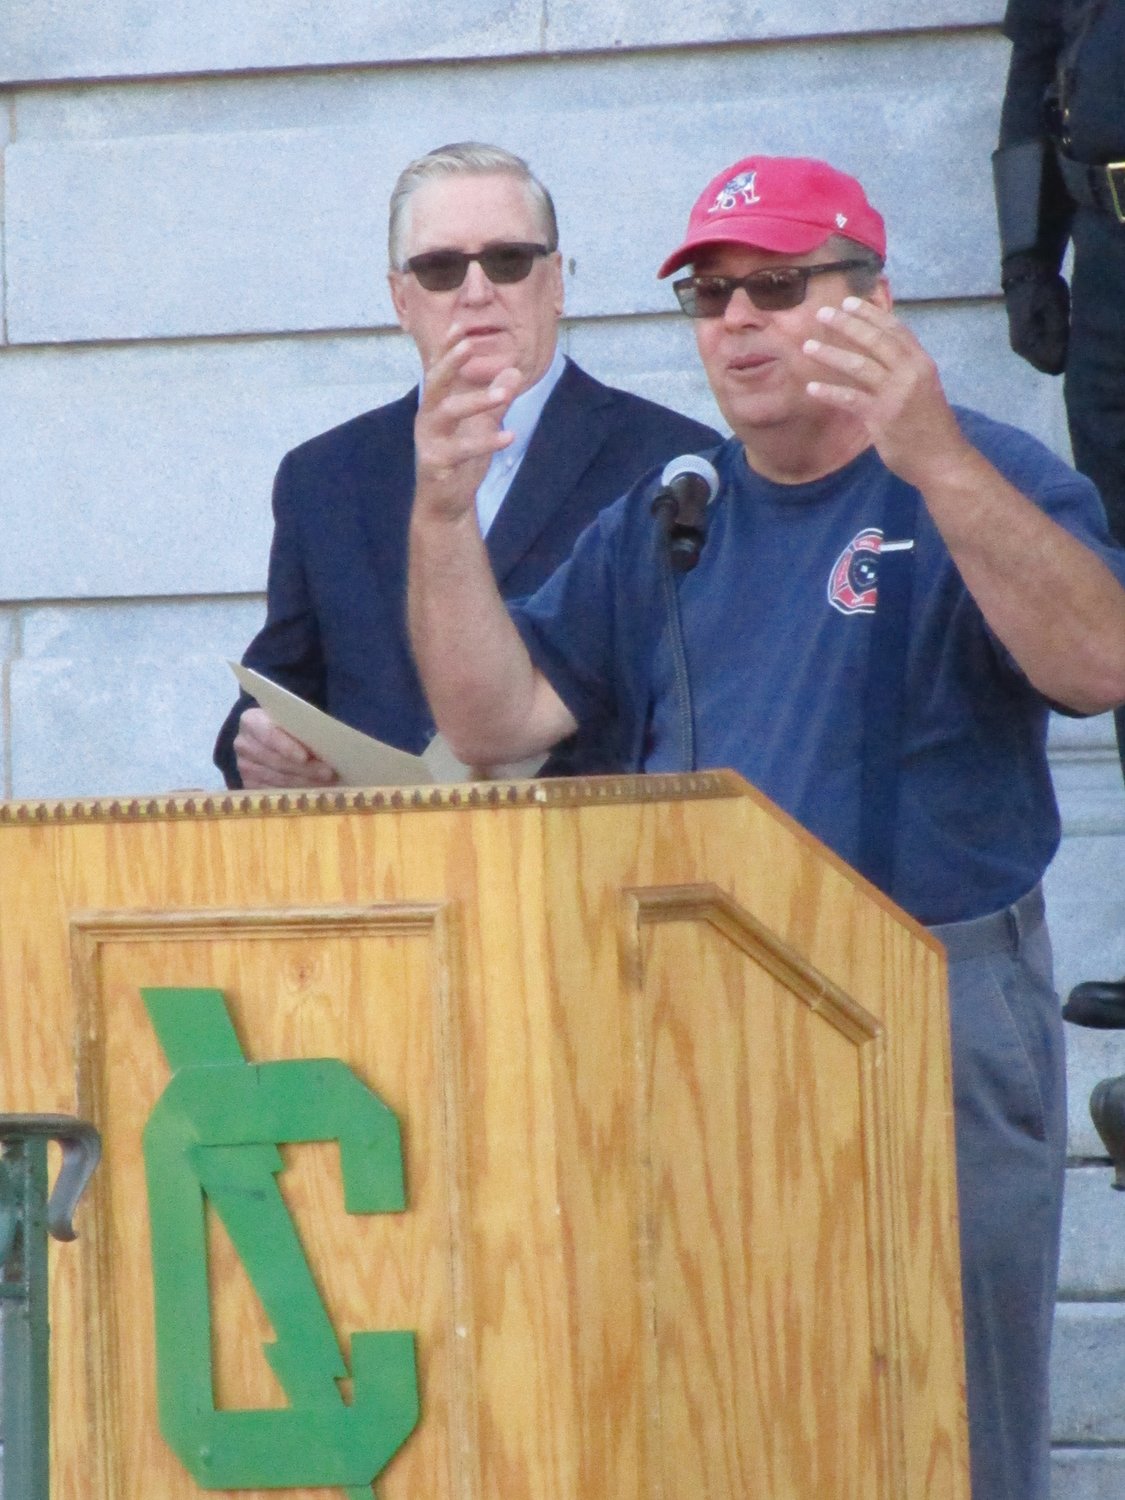 ‘SUPPORT YOUR COMMUNITY’:Cranston East social studies teacher Christopher Ogheltree addresses the crowd gathered for Saturday's ceremony as Mayor Ken Hopkins looks on.